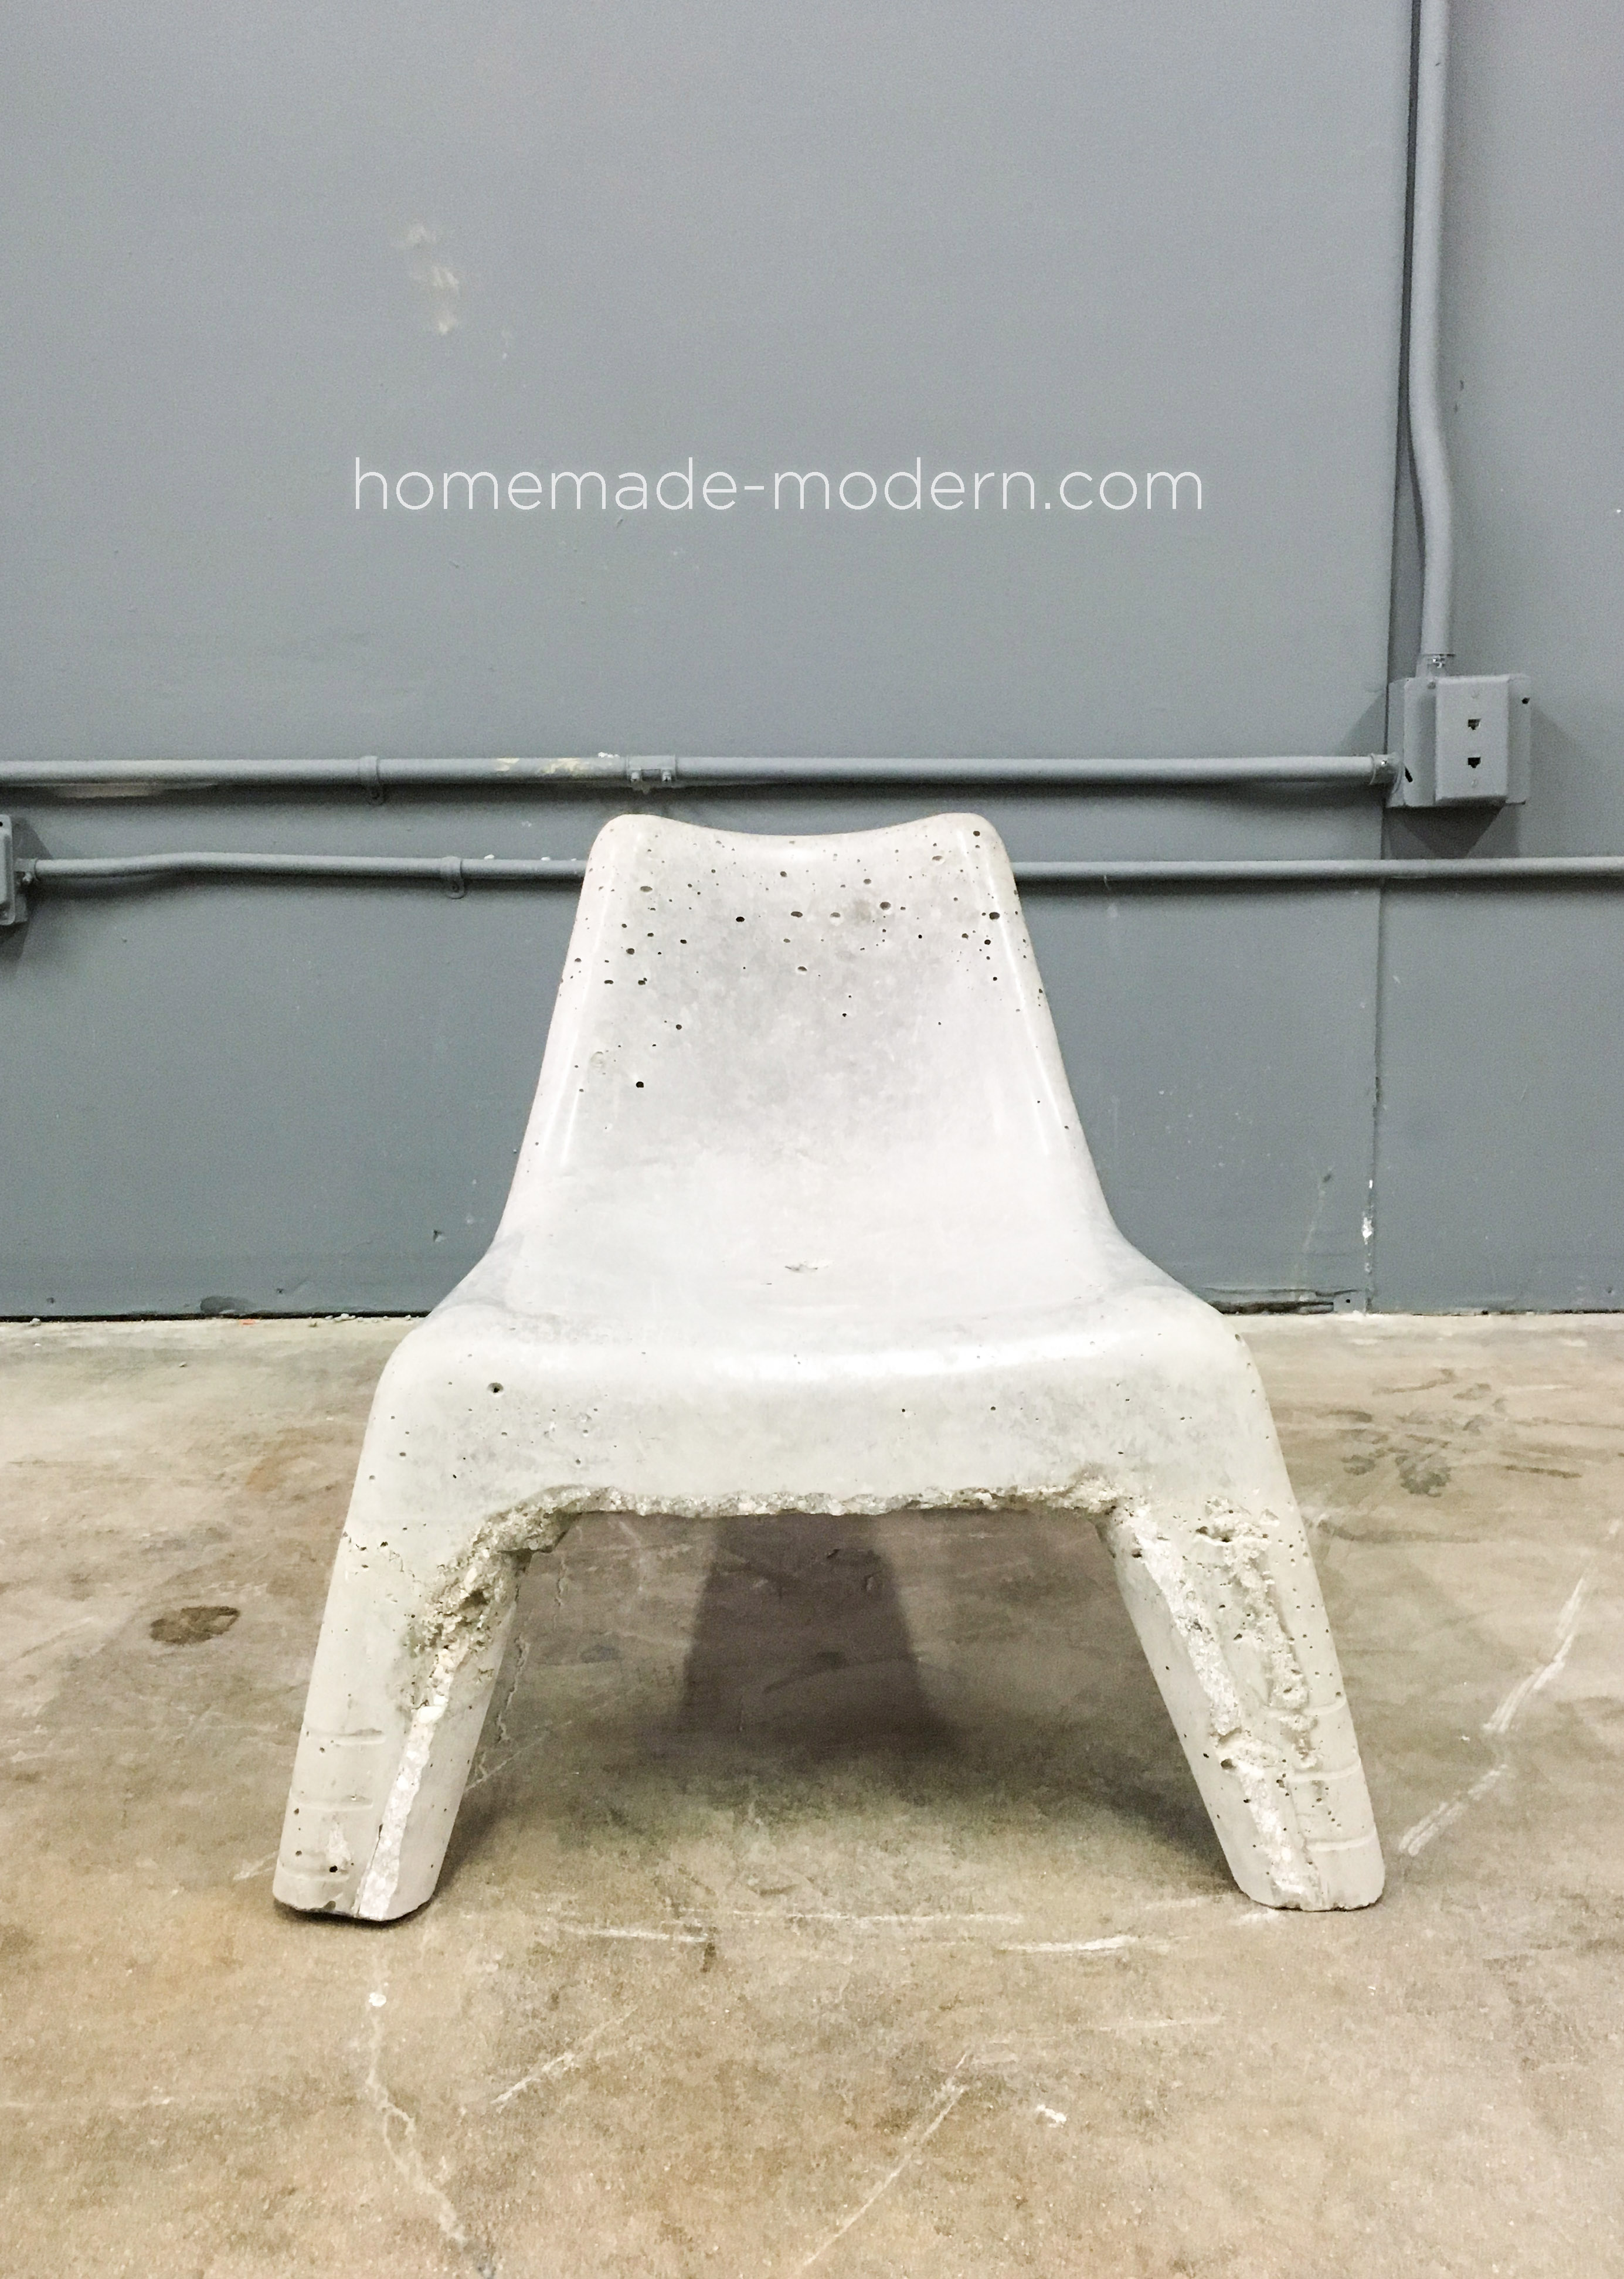 This DIY Concrete Chair was cast in a plastic chair from IKEA. For more information go to HomeMade-Modern.com